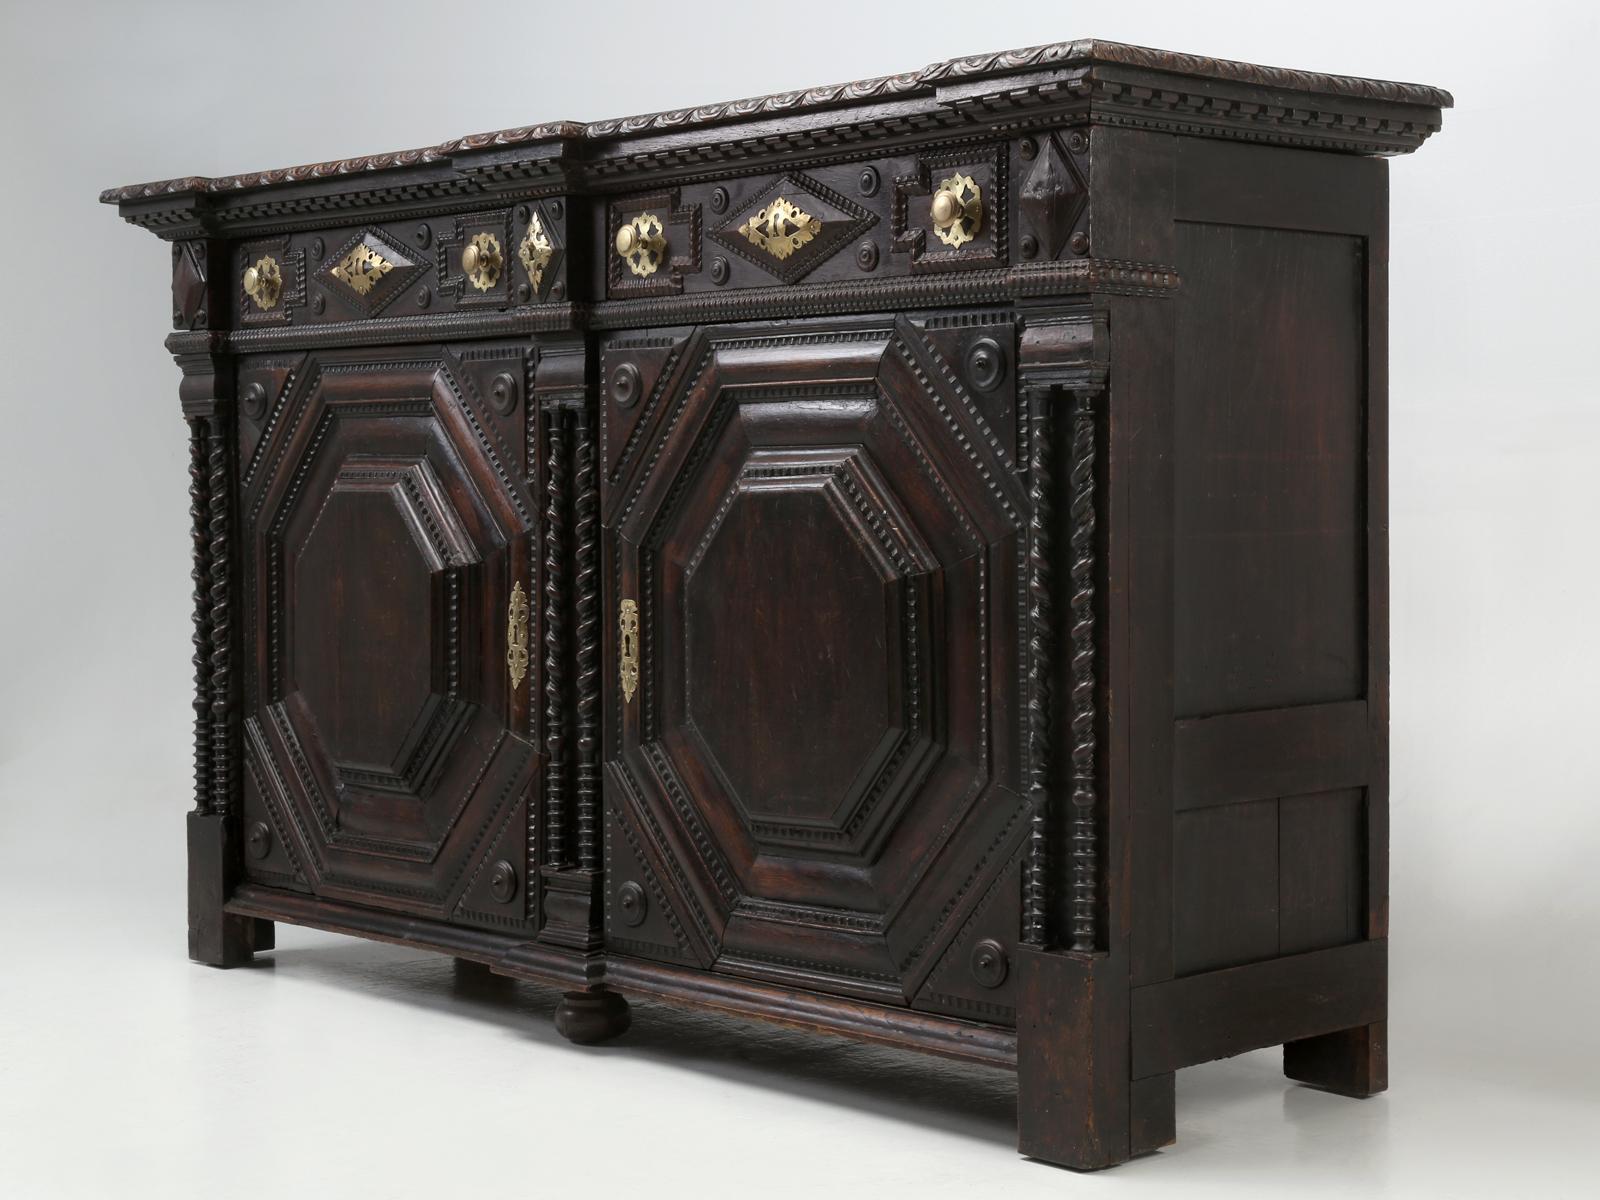 Exquisite antique French Buffet from the St-Malo, Malouin region of France and what makes this French Buffet so special and so unusual, besides the obvious, it’s incredible visual impact, is that whomever originally built this French Buffet,